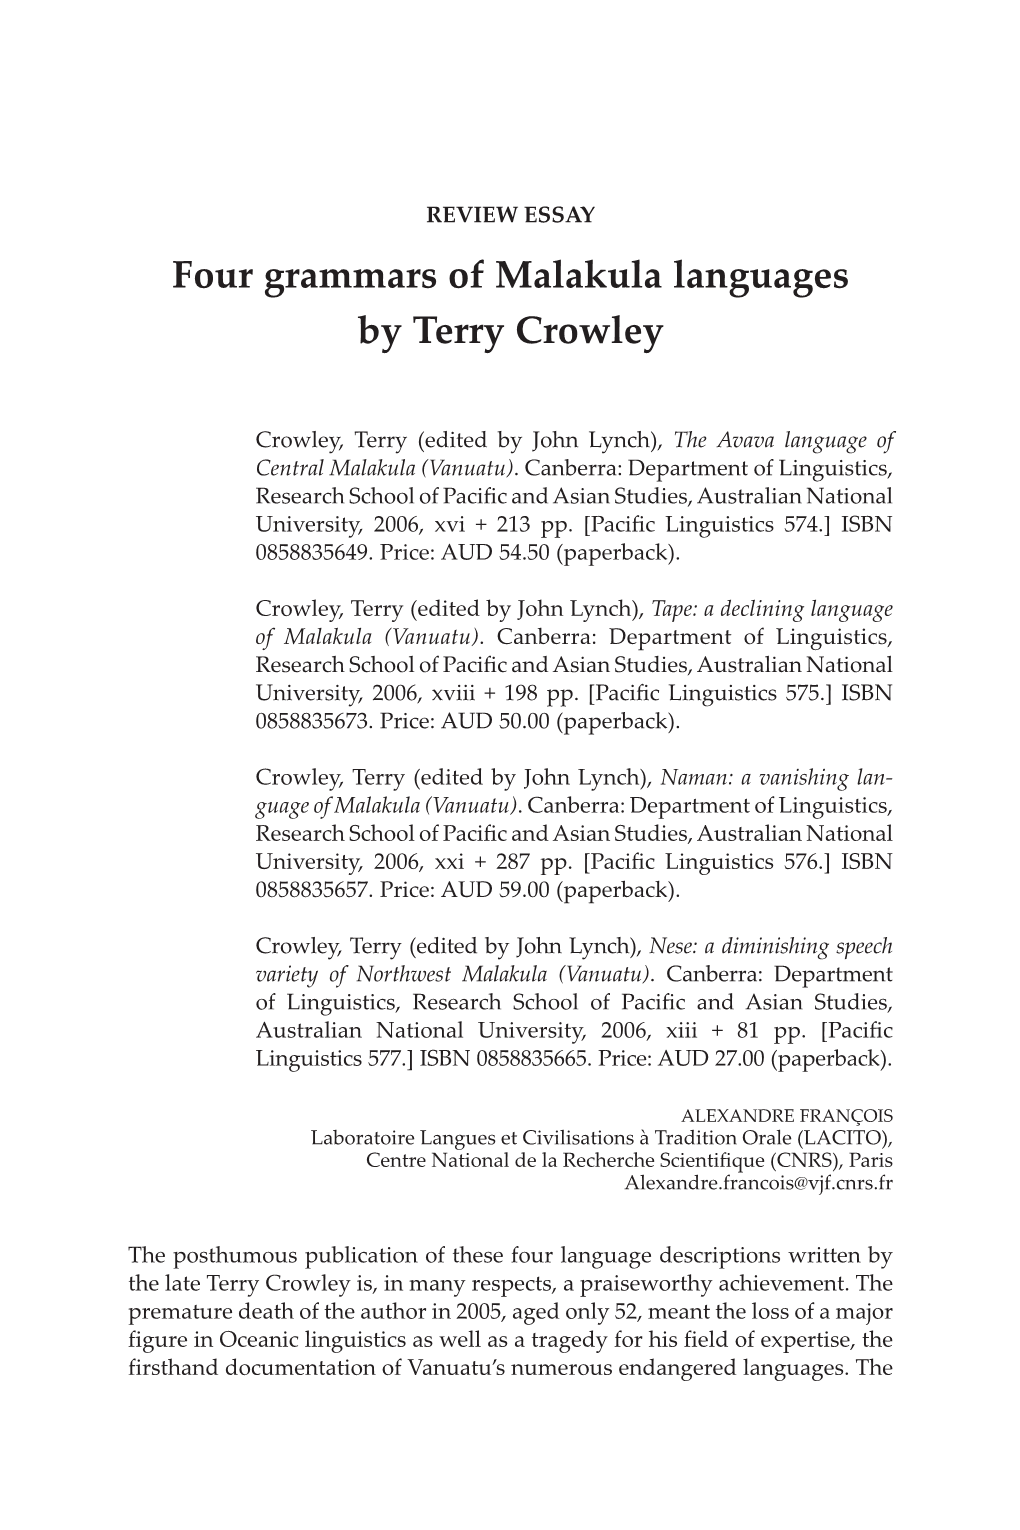 Four Grammars of Malakula Languages by Terry Crowley